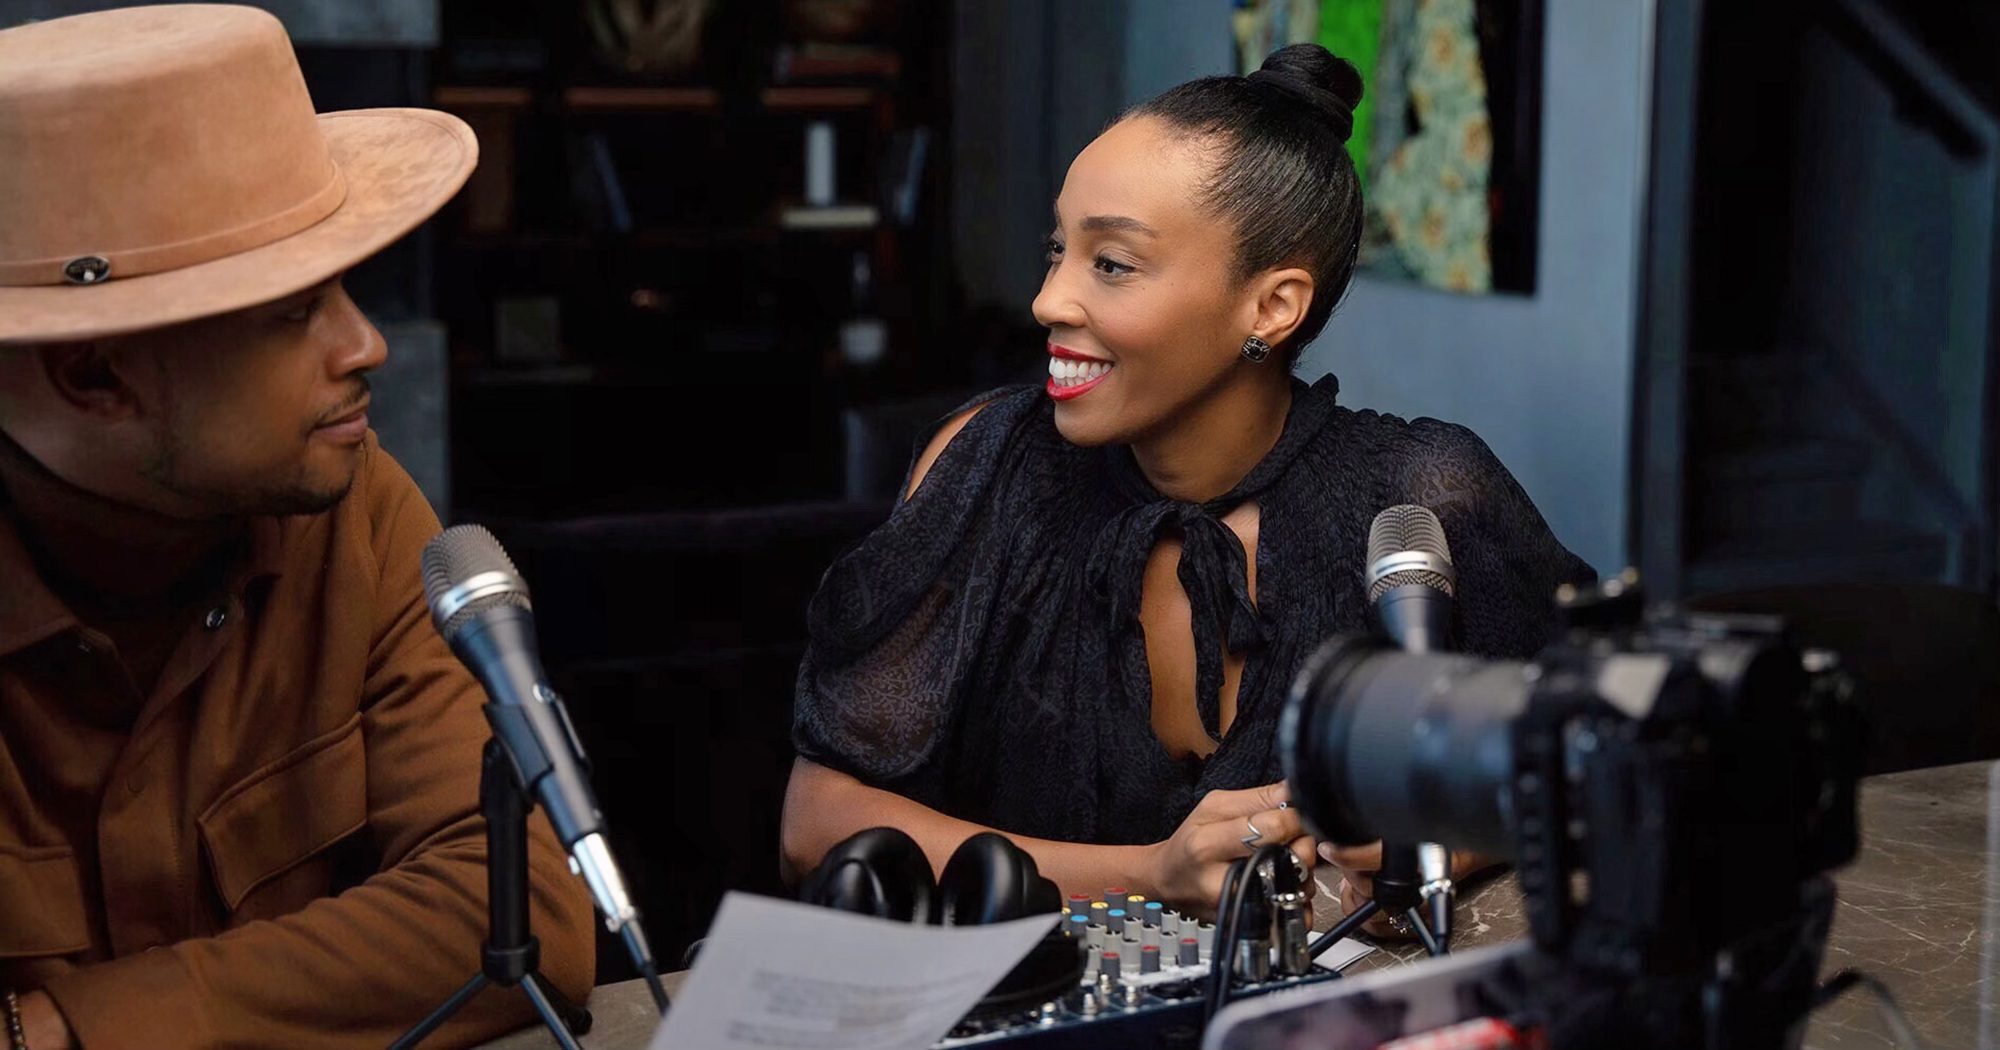 Recognizing the importance of showcasing small business excellence within the creator community, American Influencer Council – AIC Founder Qianna Smith Bruneteau and Public Goodwill Committee co-chair Karston ‘Skinny’ Tannis have joined forces to co-host the Creators with Influence Podcast.